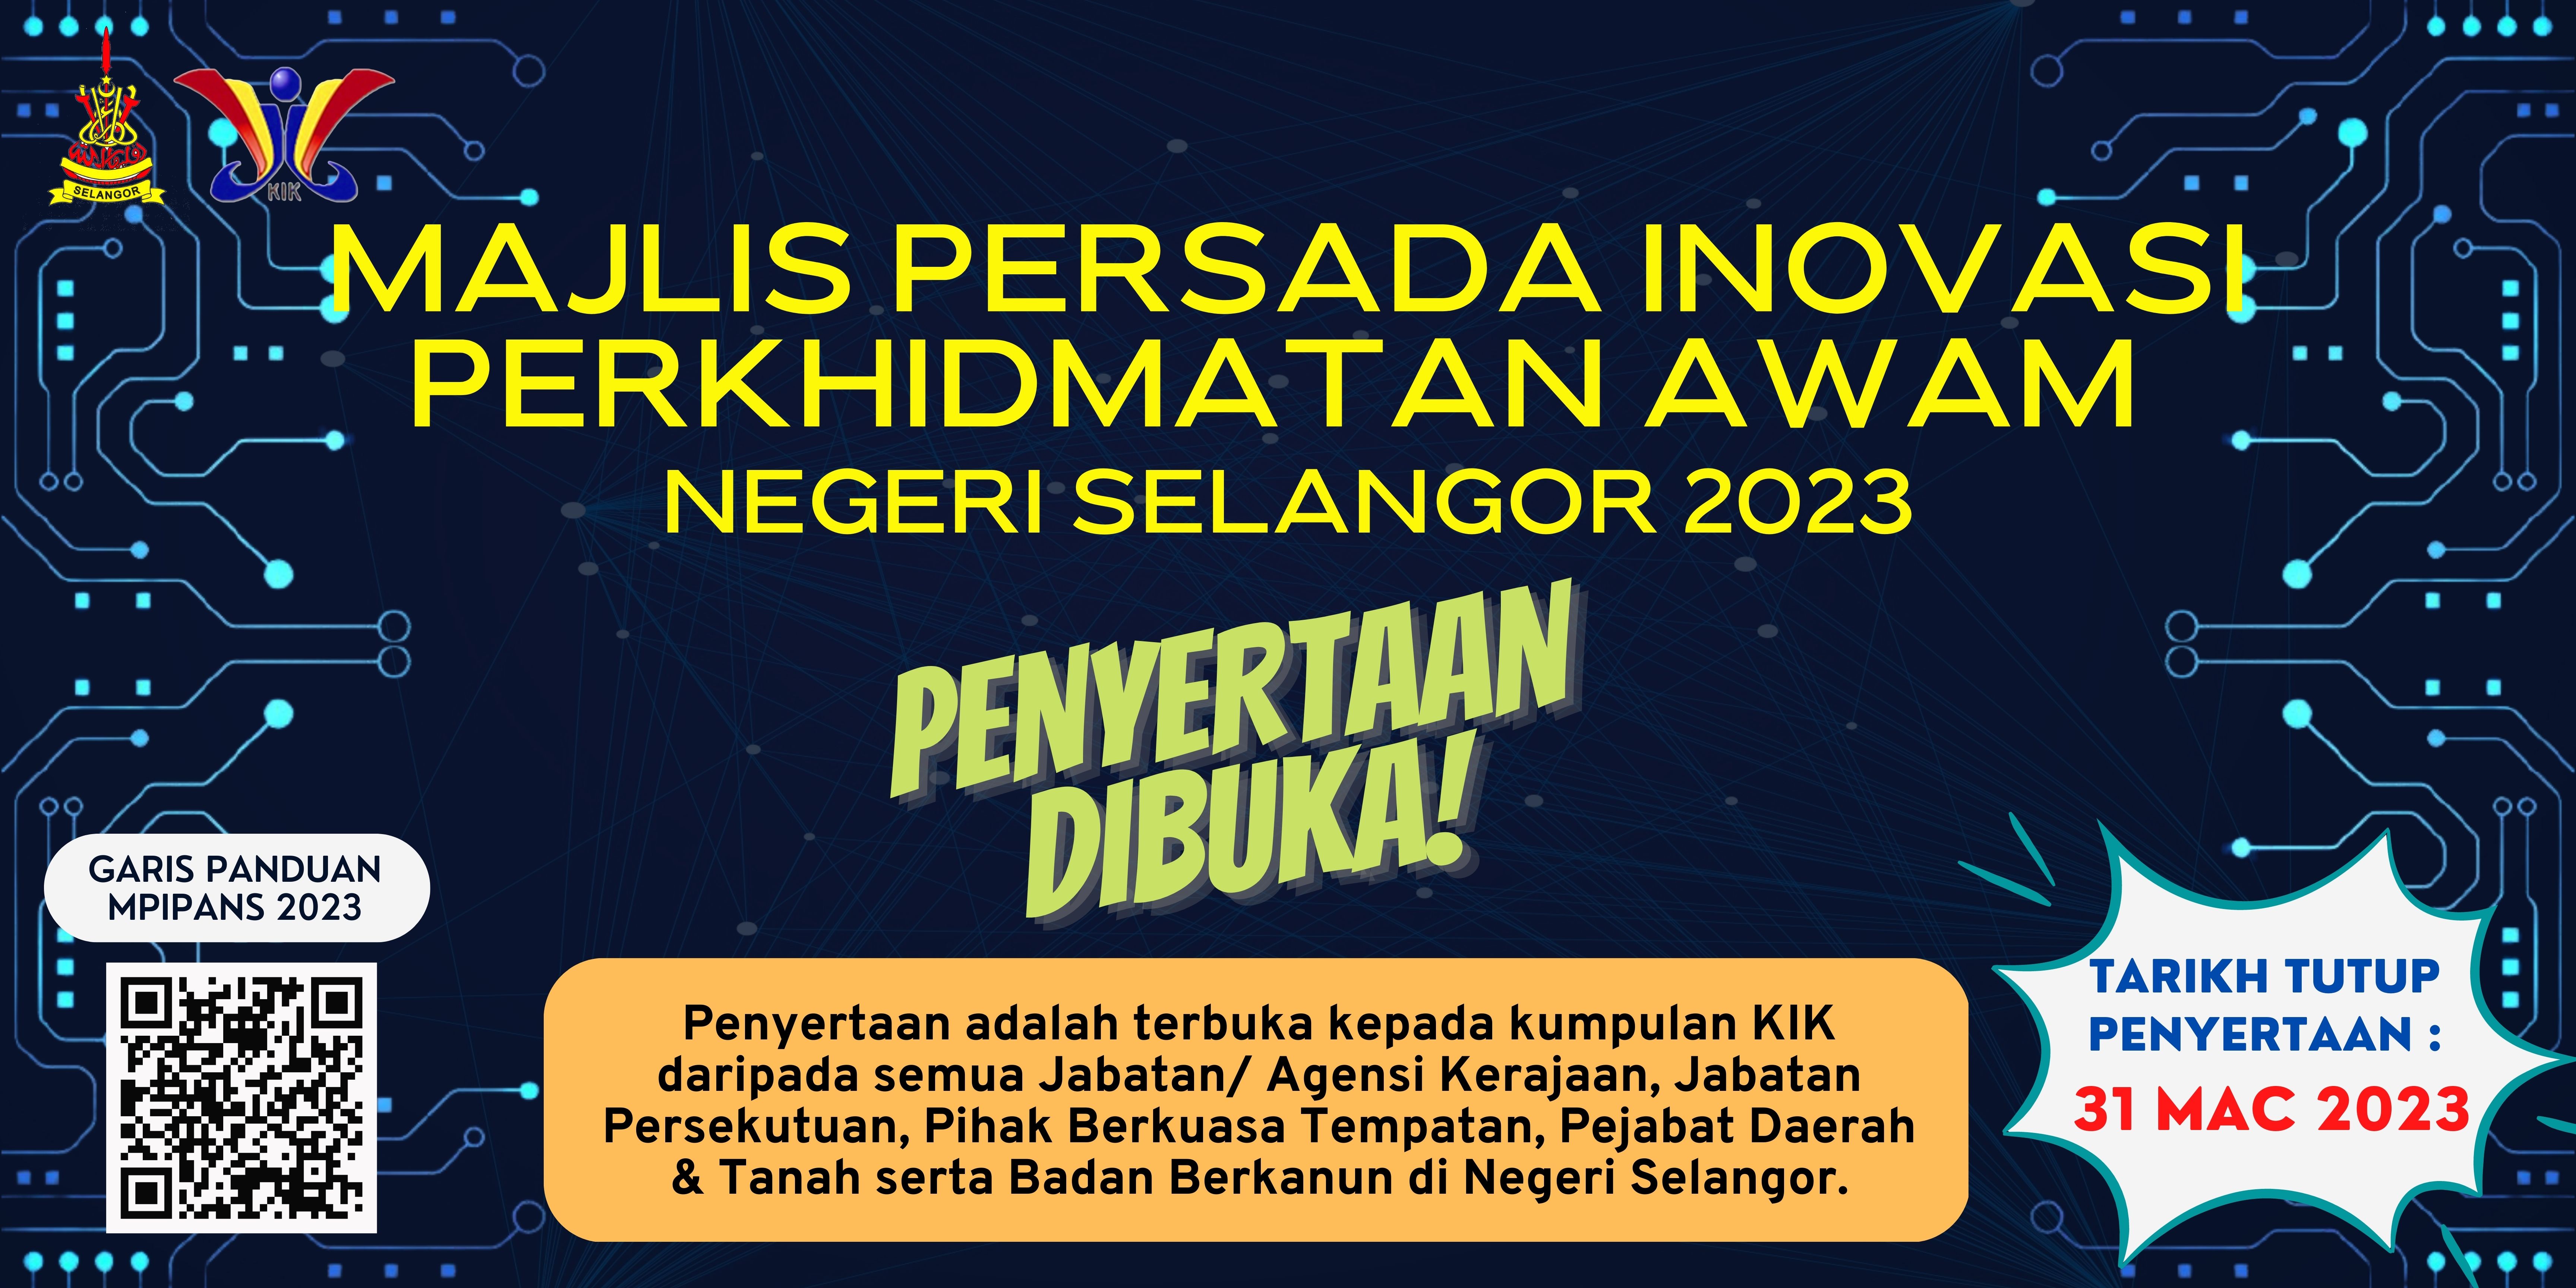 MPIPANS2023